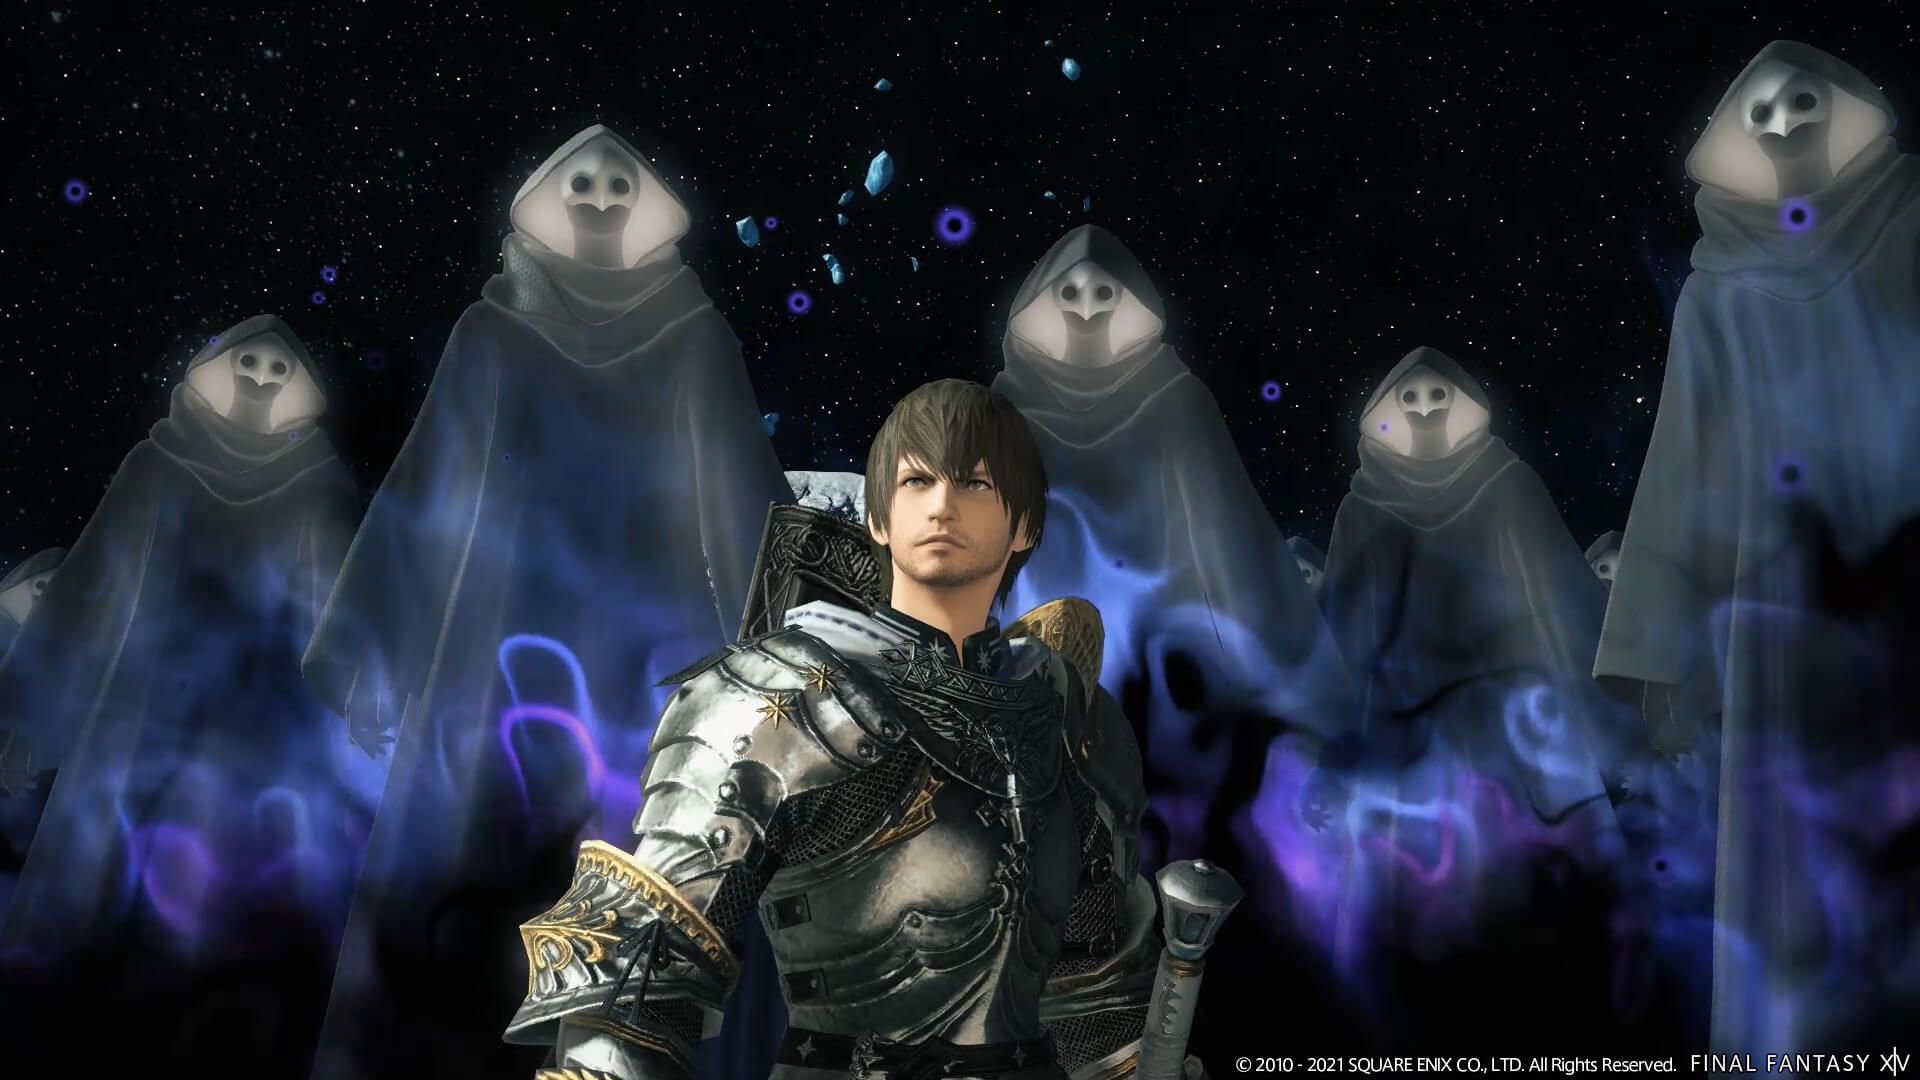 The player surrounded by Ascian ghosts in Final Fantasy XIV: Endwalker